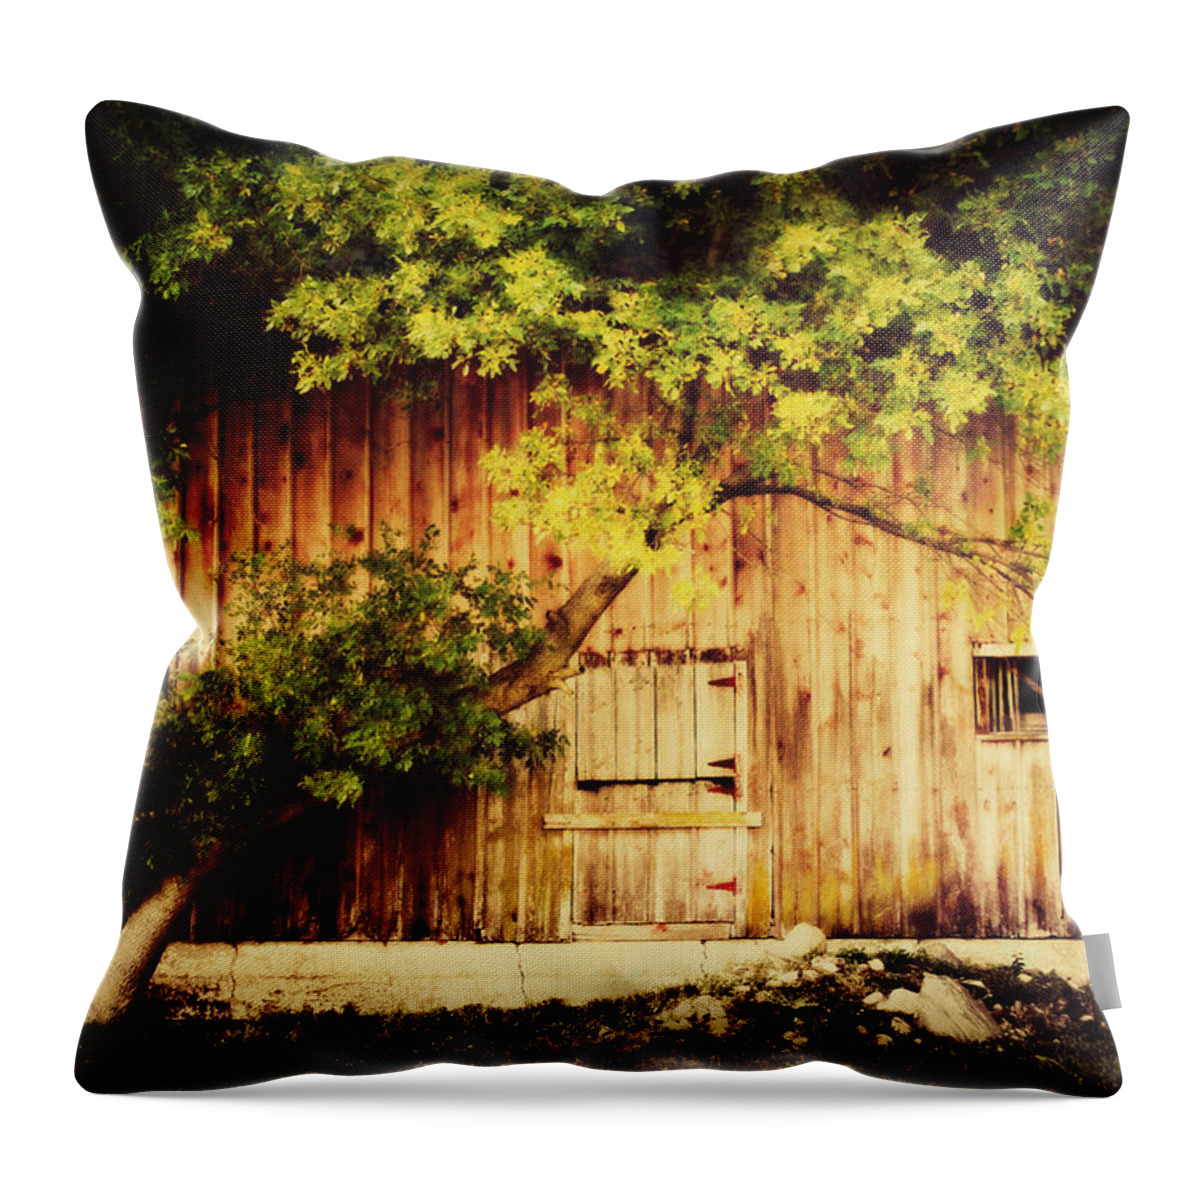 Barn Throw Pillow featuring the photograph Natures Awning by Julie Hamilton